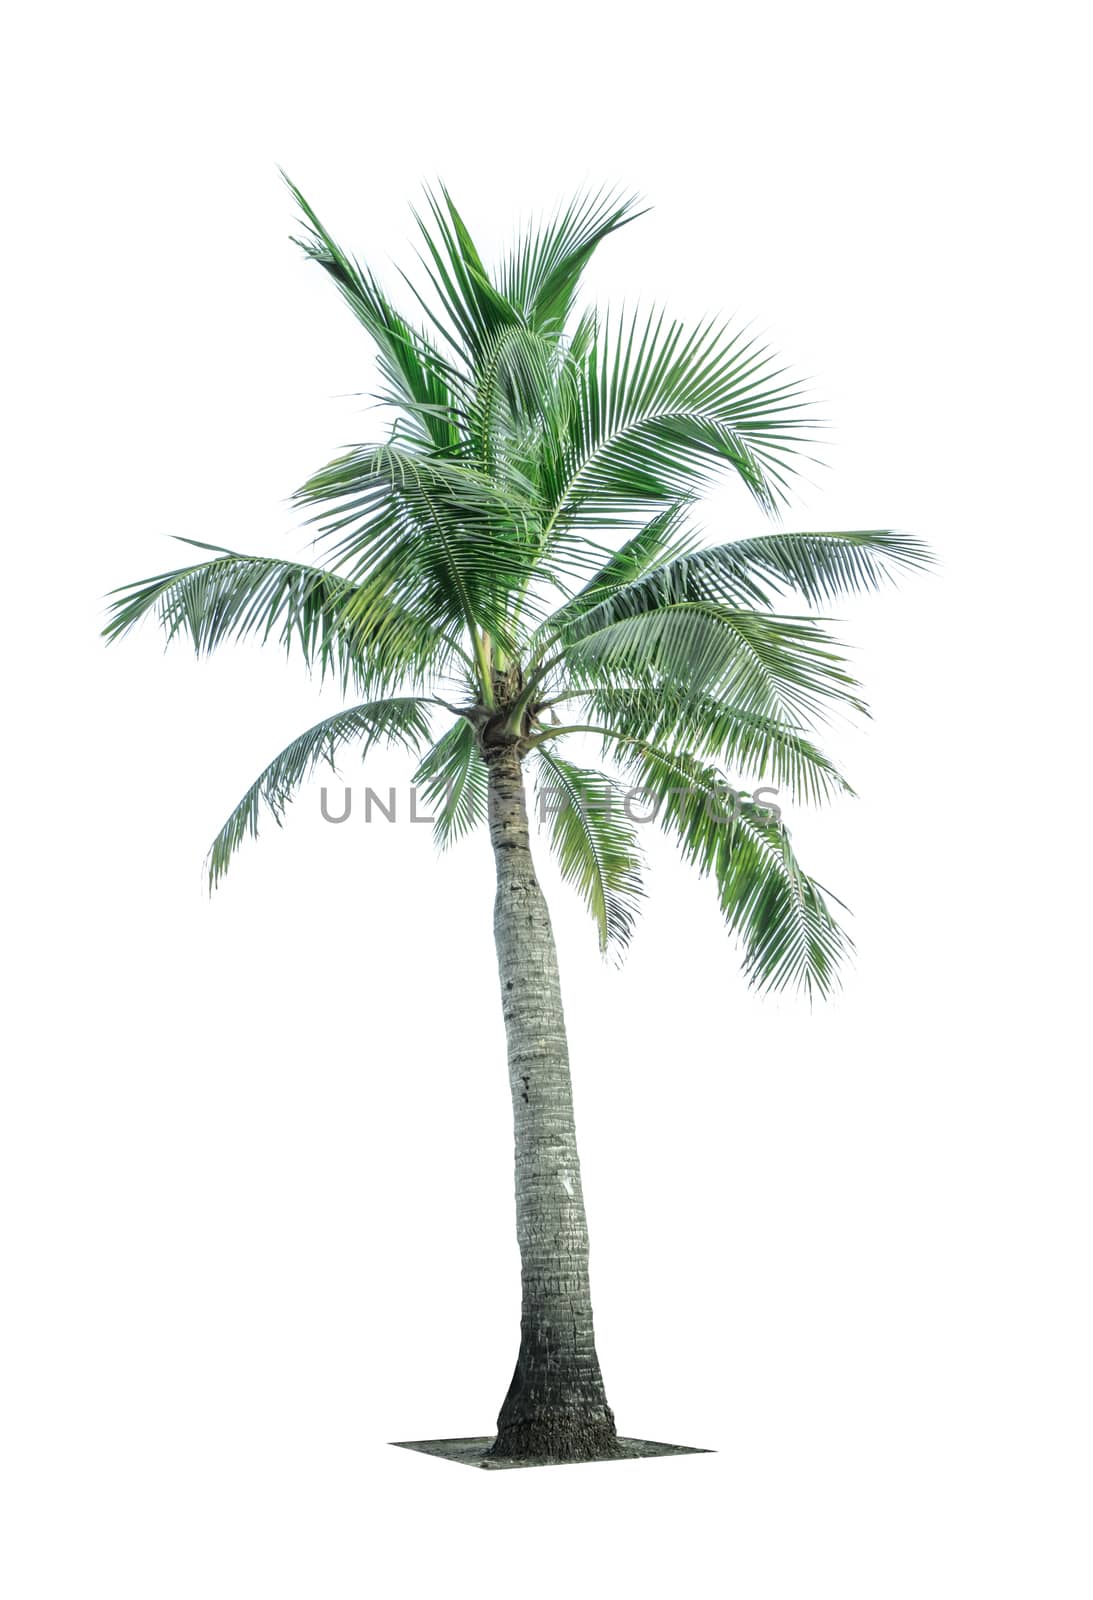 Coconut tree isolated on white background used for advertising decorative architecture. Summer and beach concept by Fahroni